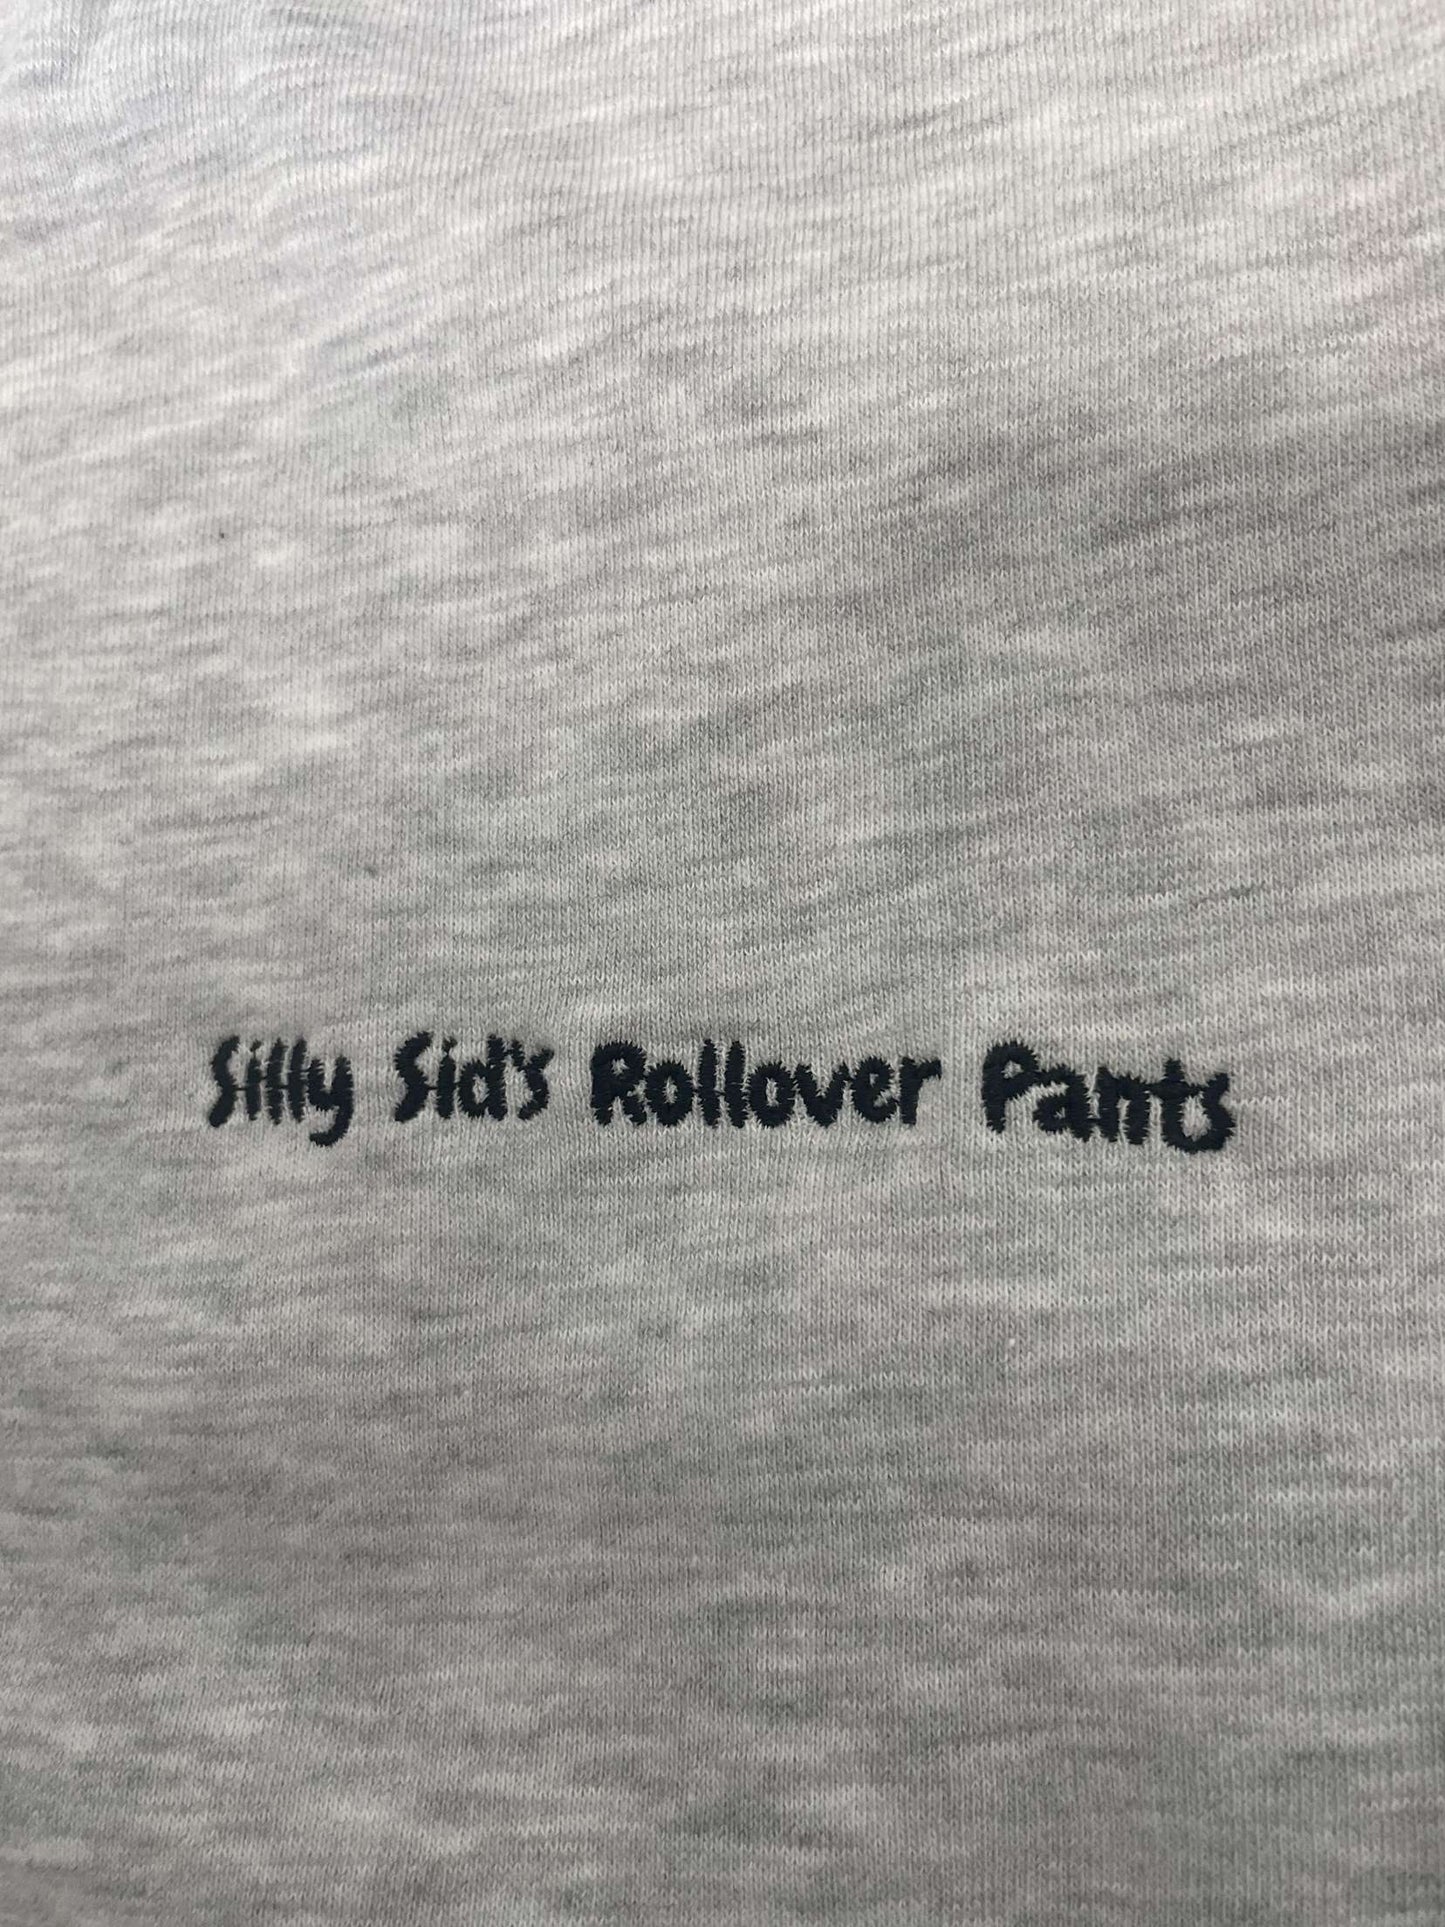 Silly Sids (Grey) Logo Rollover Pants